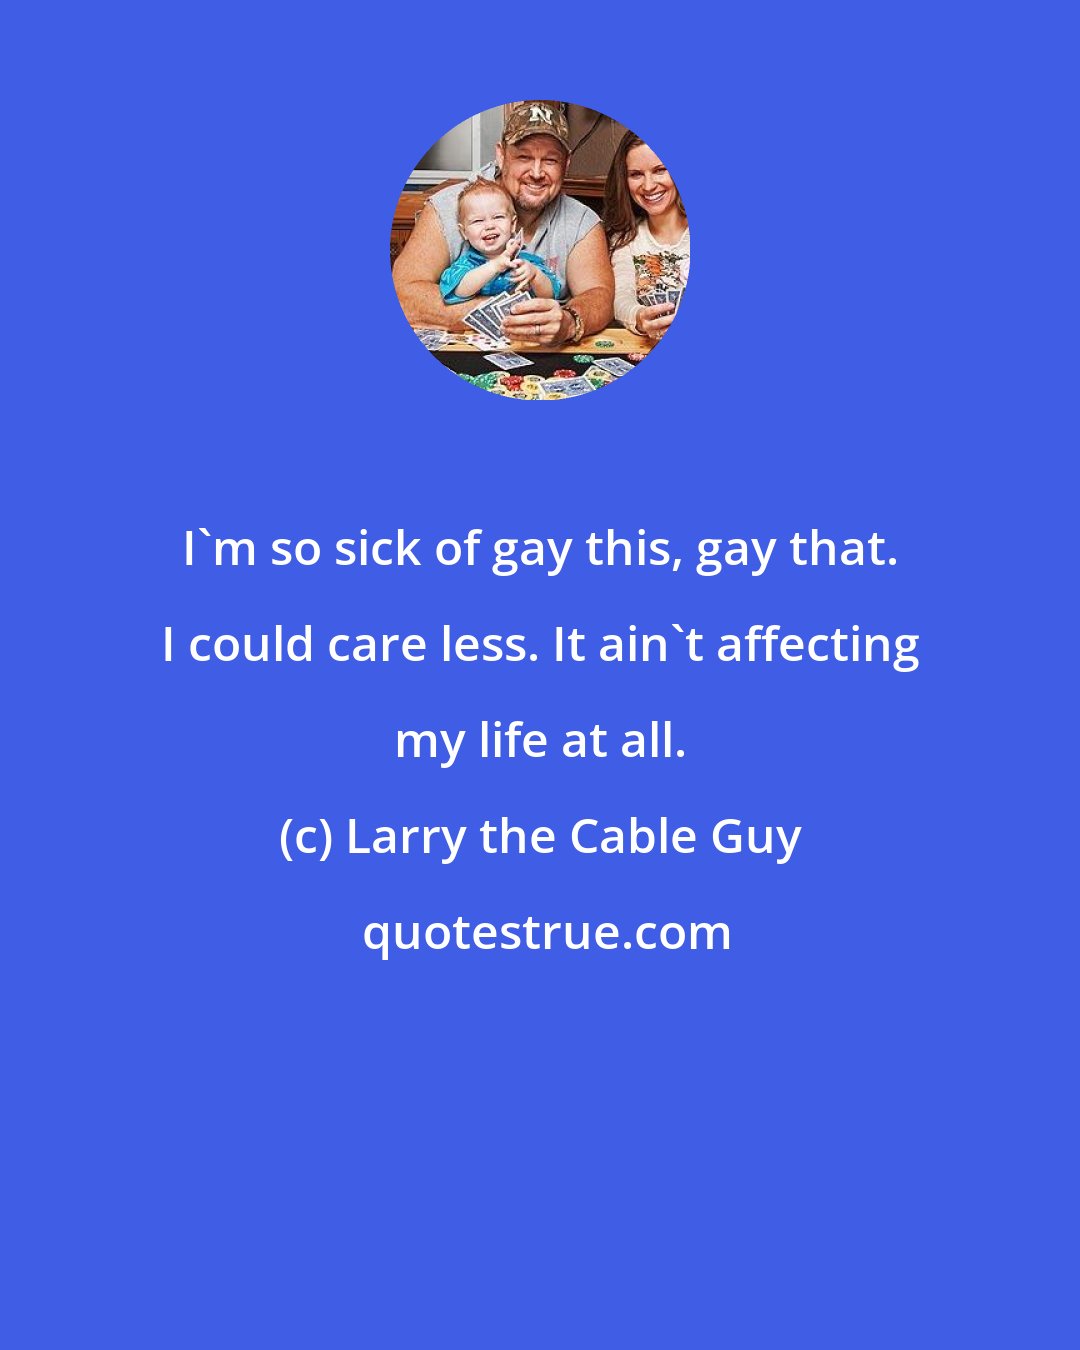 Larry the Cable Guy: I'm so sick of gay this, gay that. I could care less. It ain't affecting my life at all.